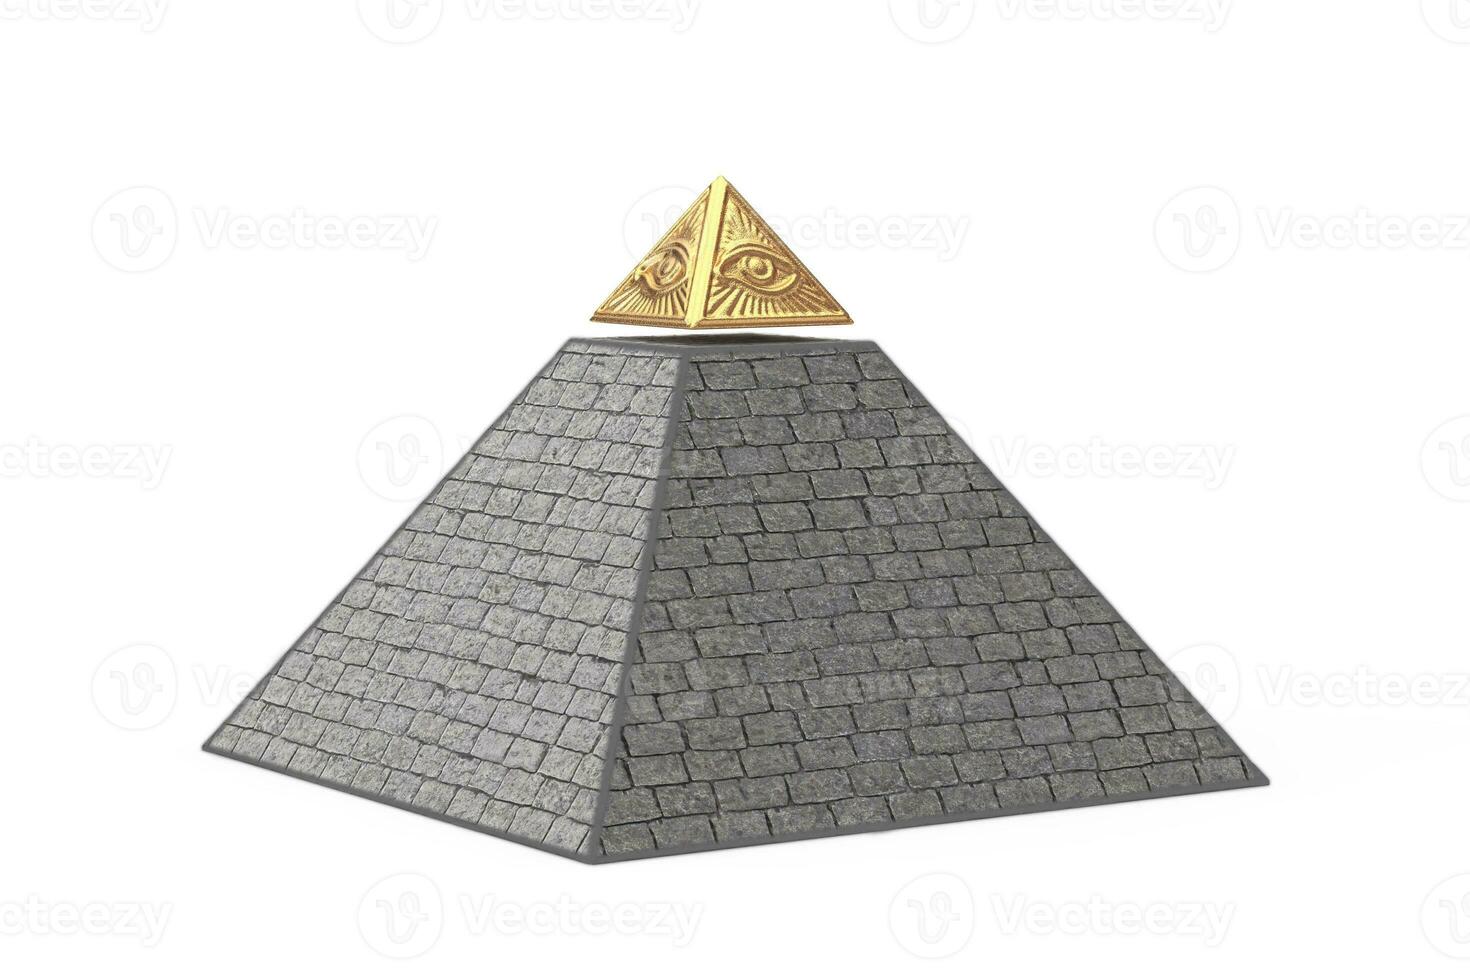 Stone Pyramid with Golden Top Masonic Symbol All Seeing Eye Pyramid Triangle. 3d Rendering photo